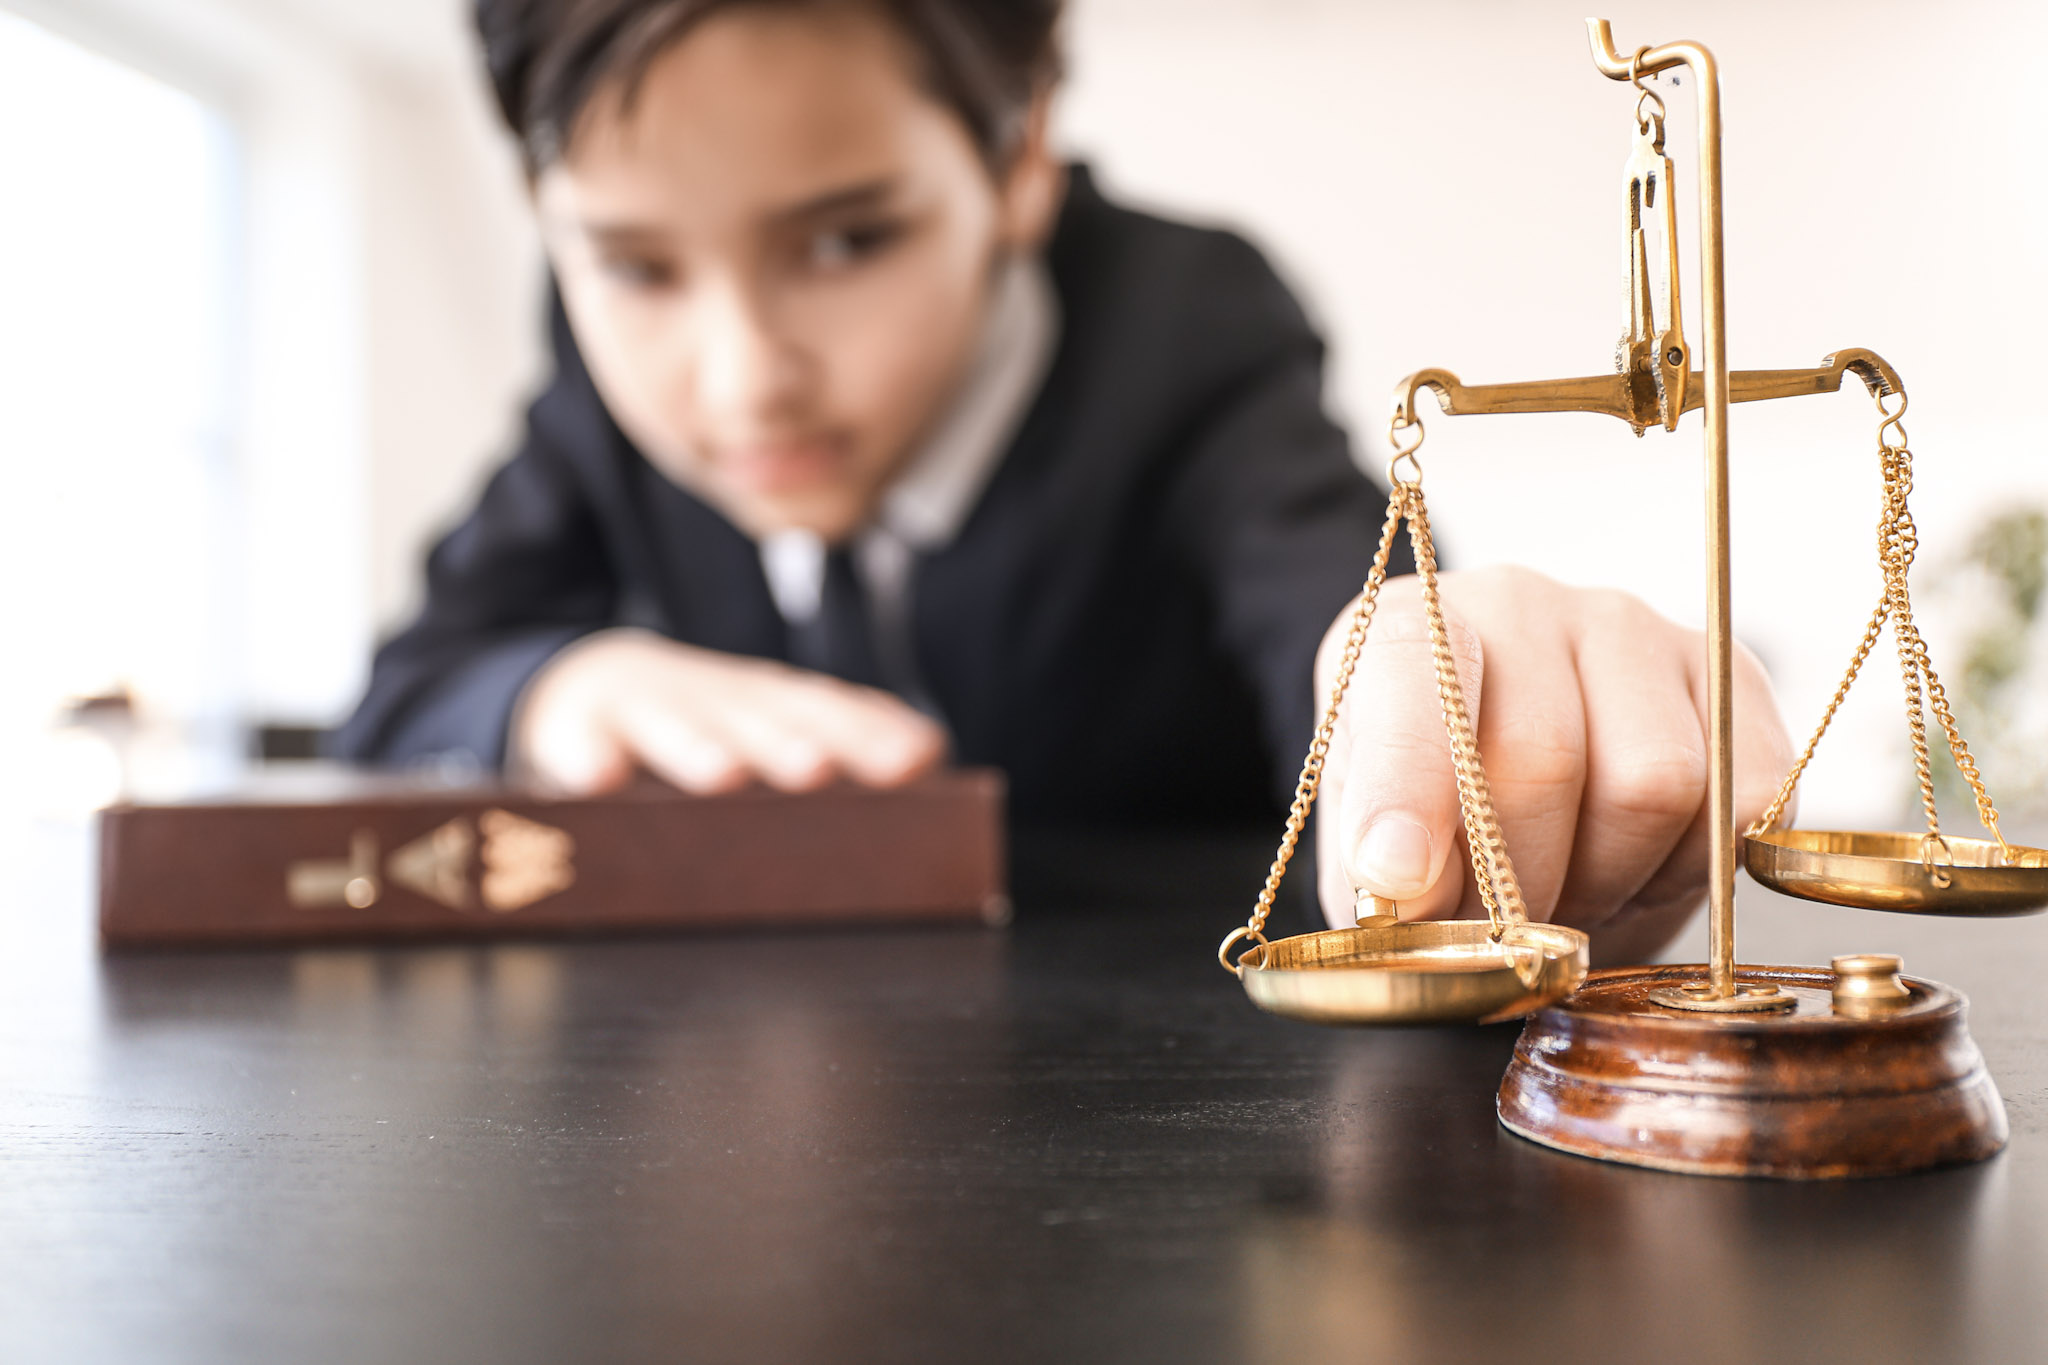 stock photo of a child dressed as a lawyer putting a weight on a model of the scales of justice